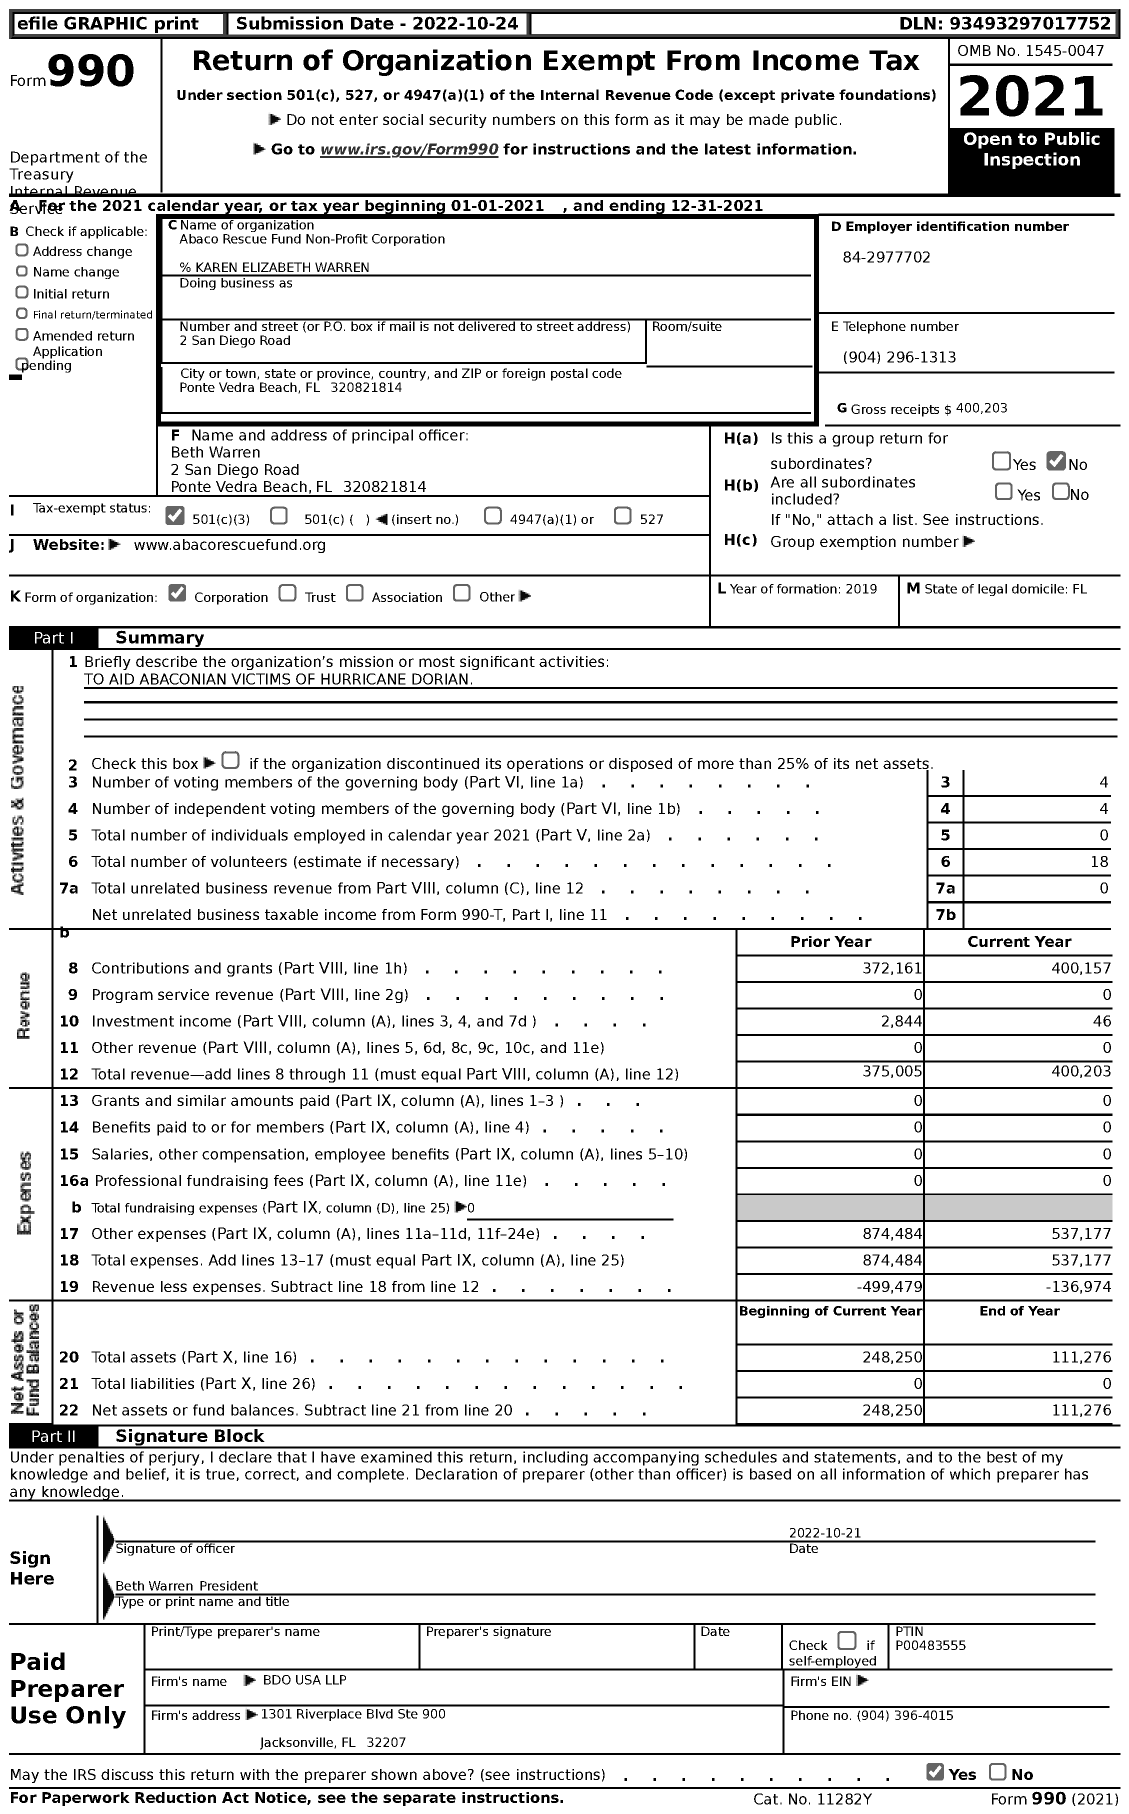 Image of first page of 2021 Form 990 for Abaco Rescue Fund Non-Profit Corporation